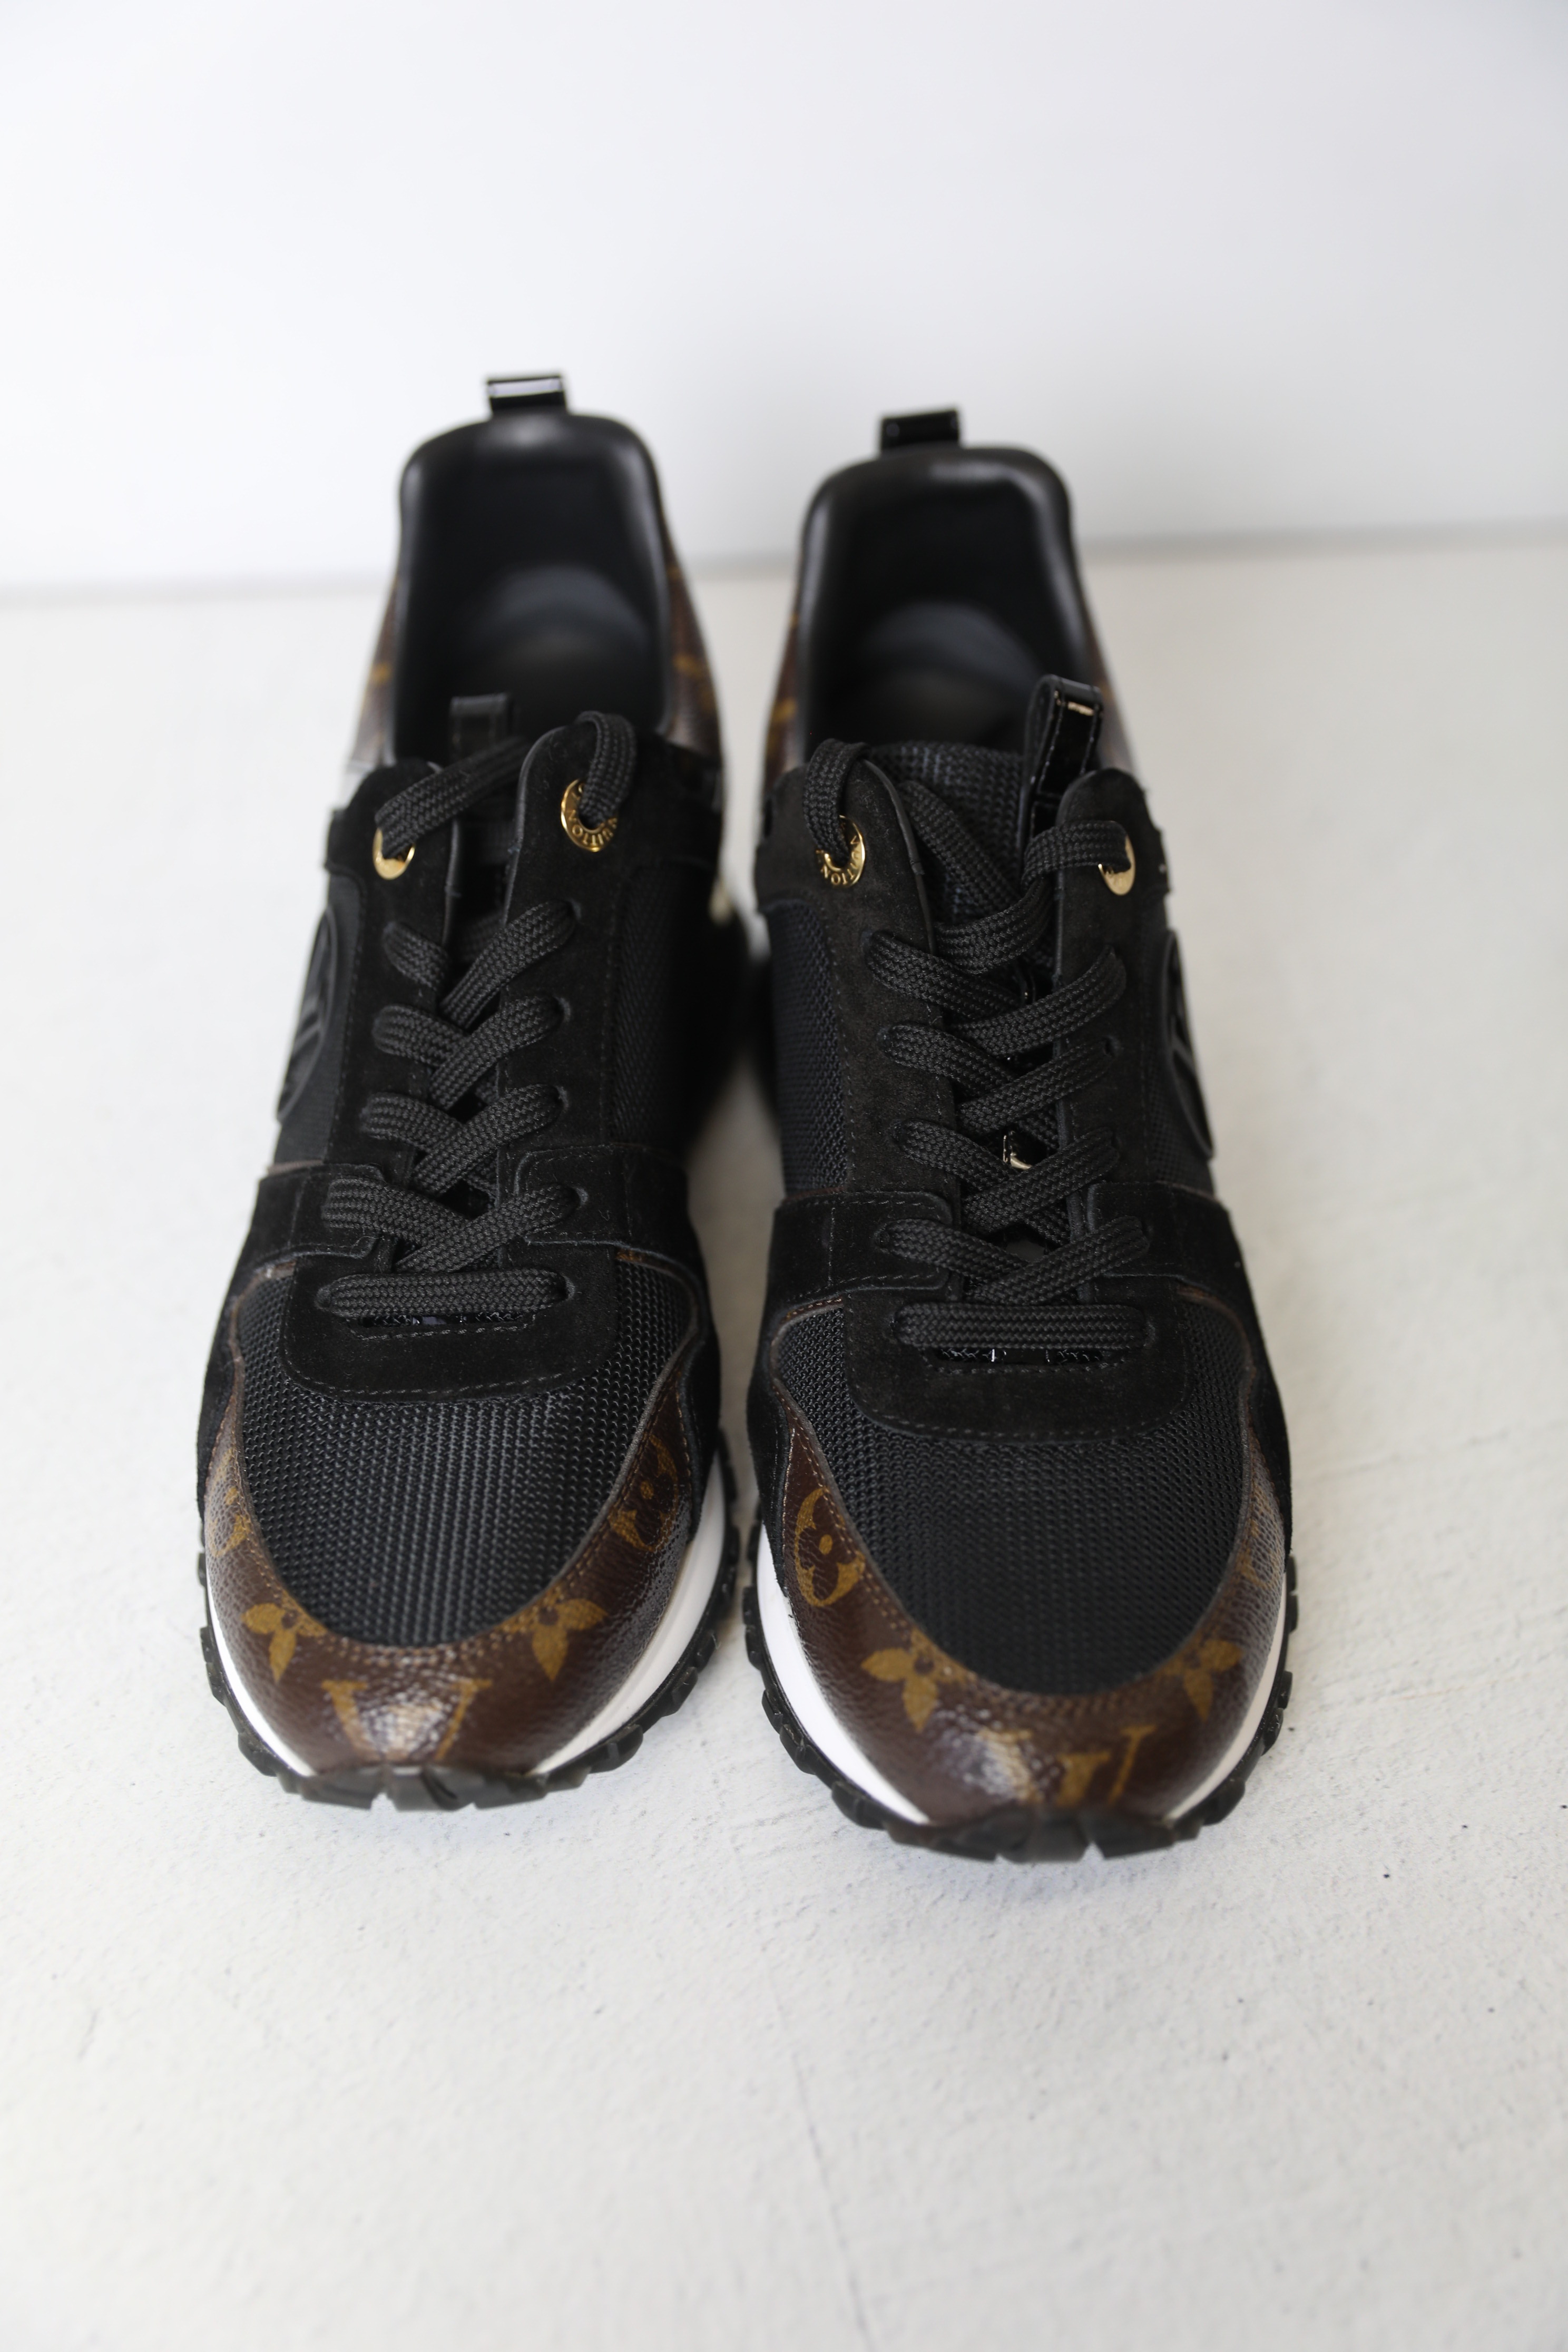 Louis Vuitton Aftergame Sneakers, Black and Monogram, Size 41, New in  Dustbag WA001